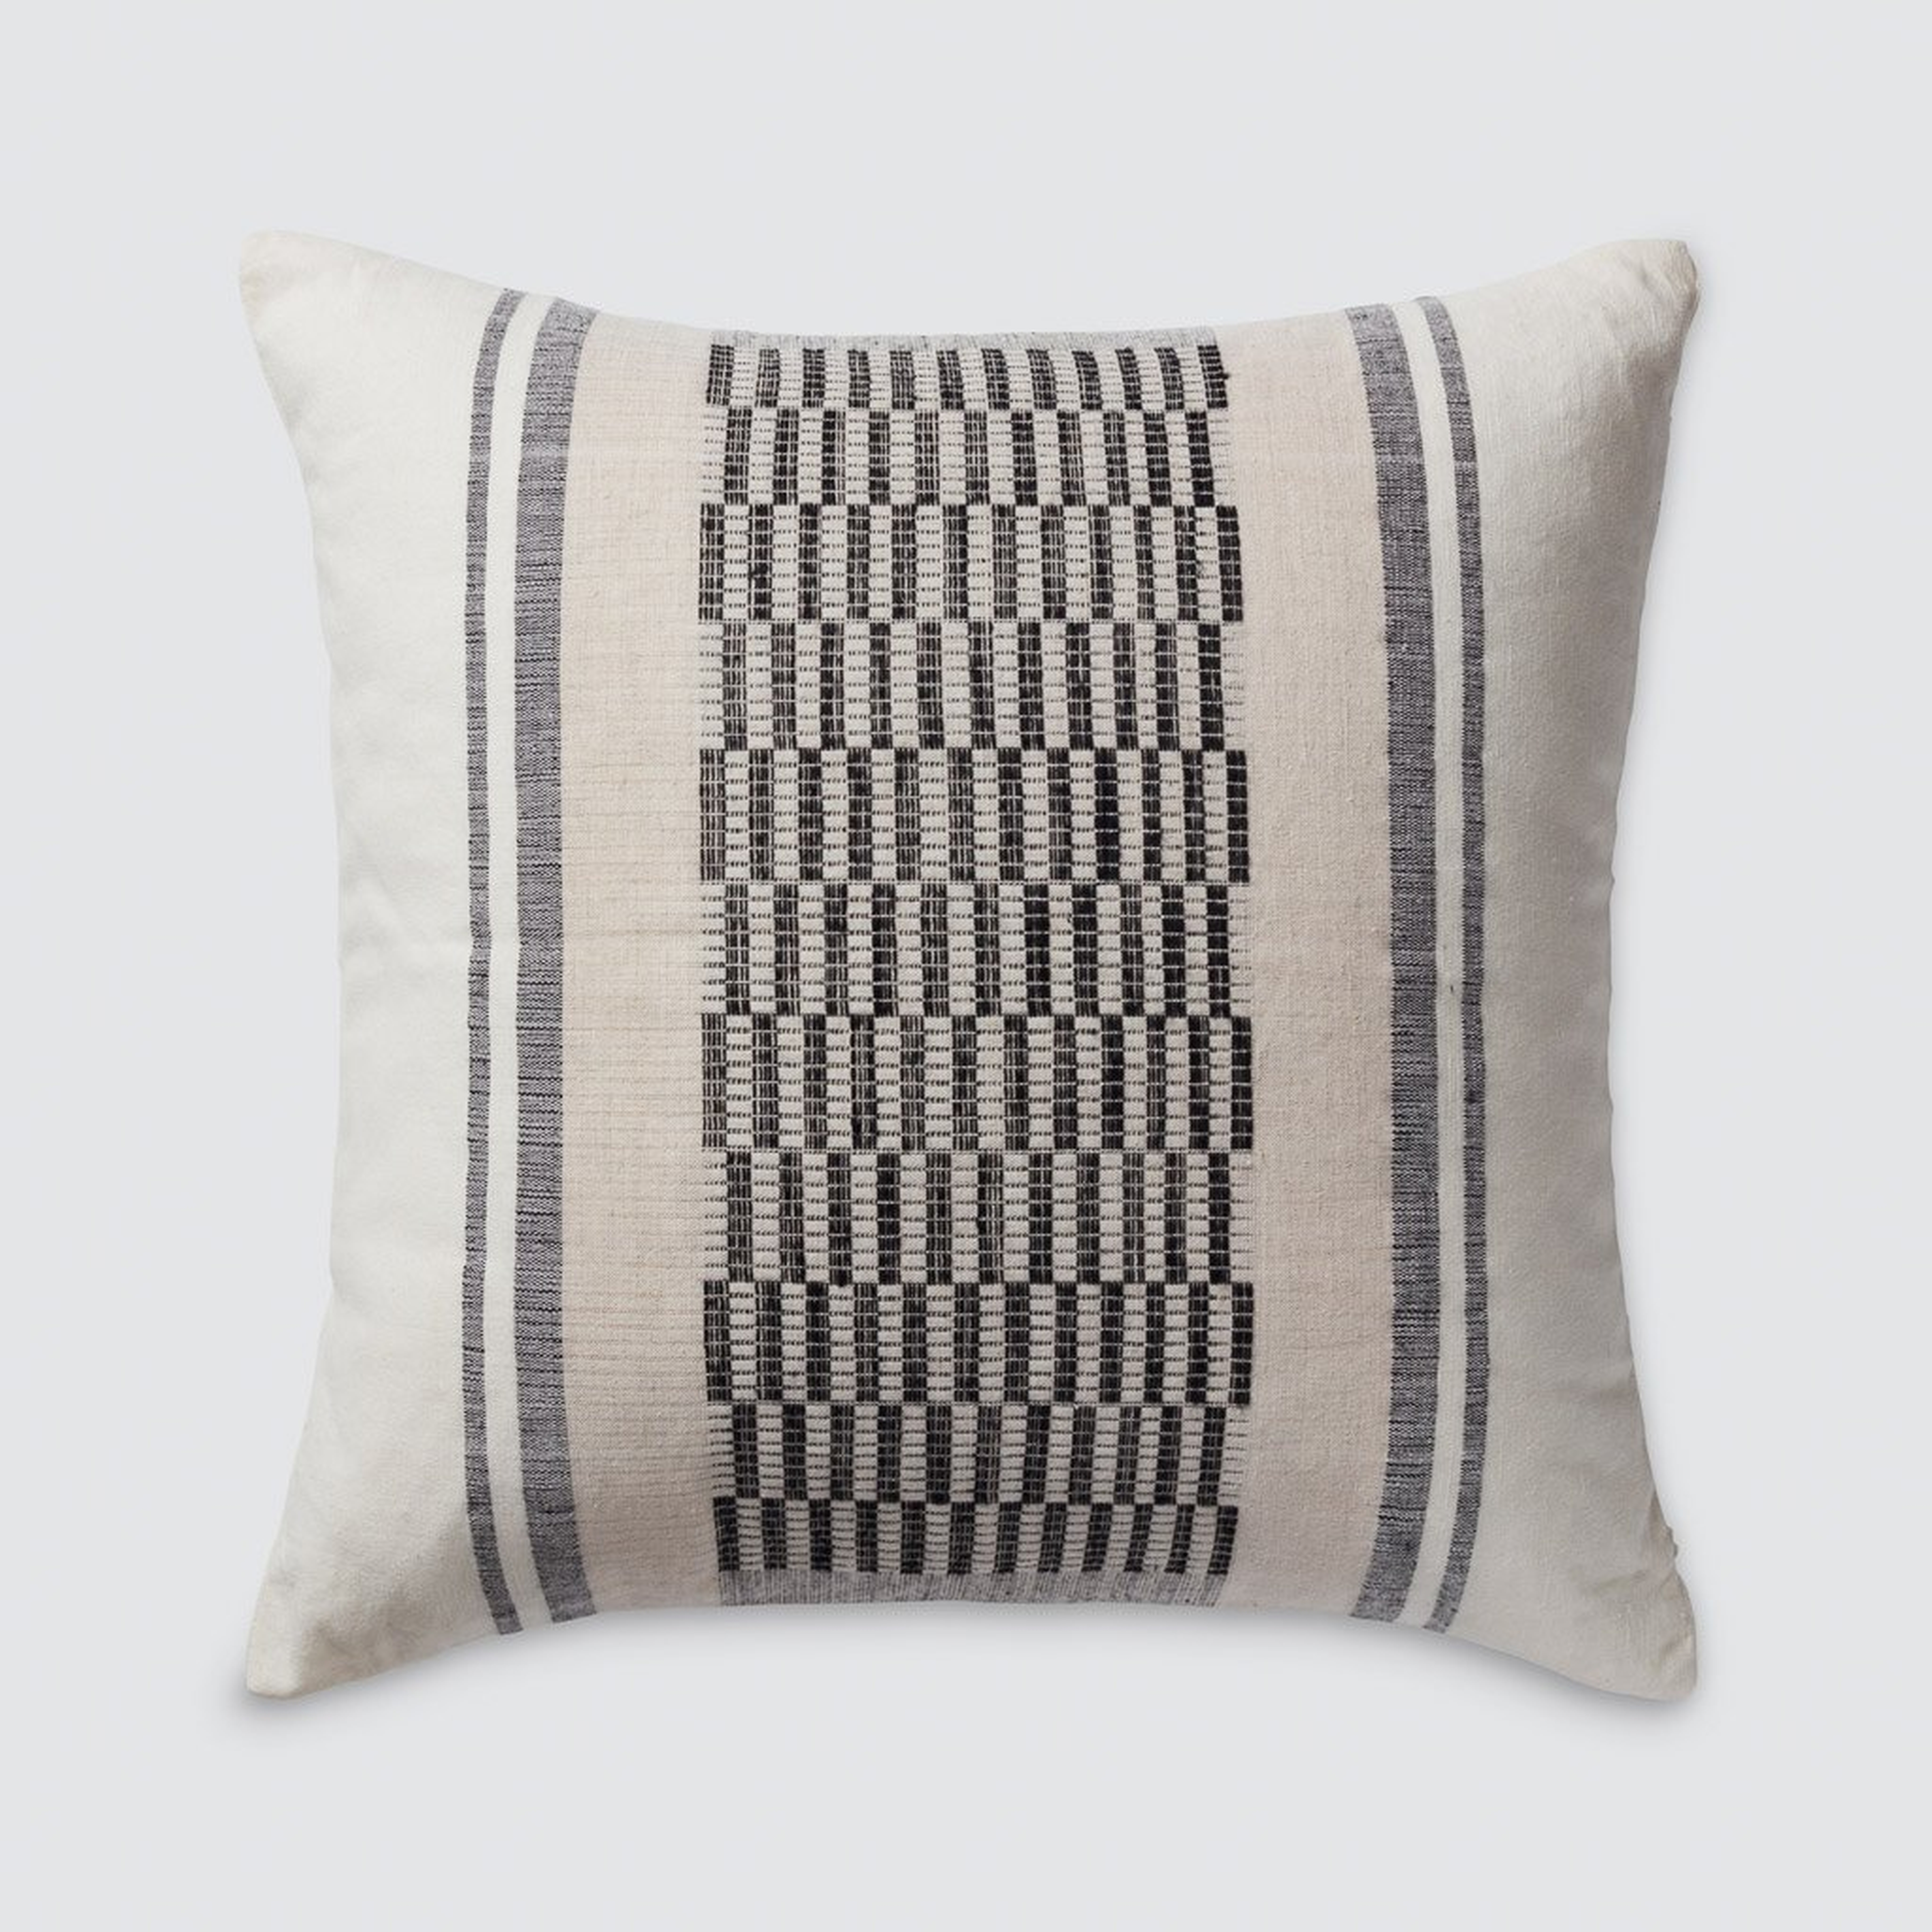 Adhira Pillow - Ecru By The Citizenry - The Citizenry